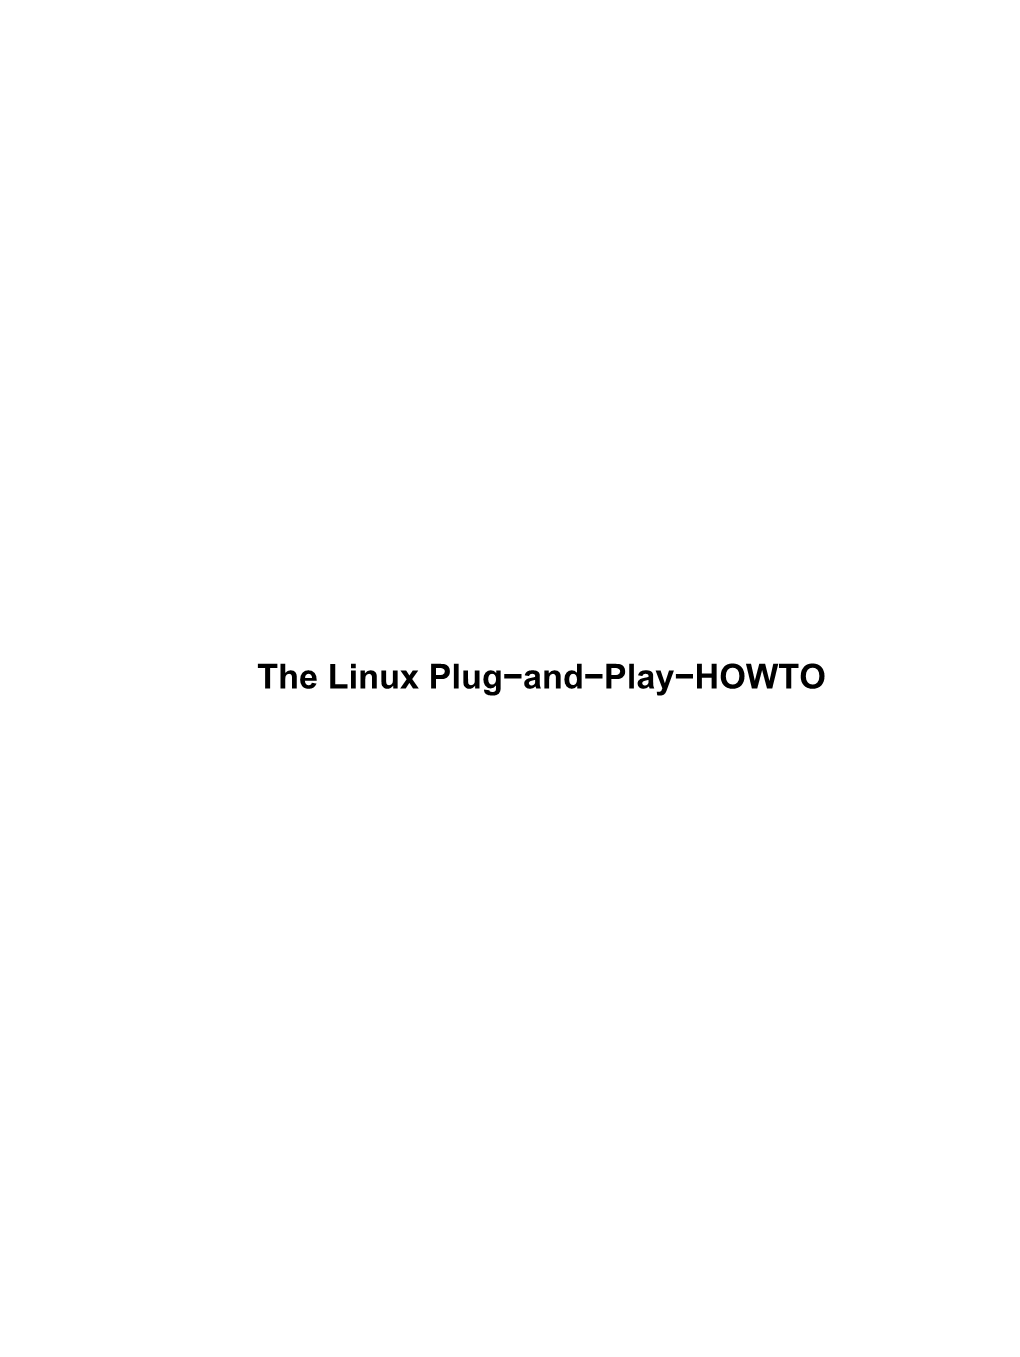 The Linux Plug-And-Play-HOWTO